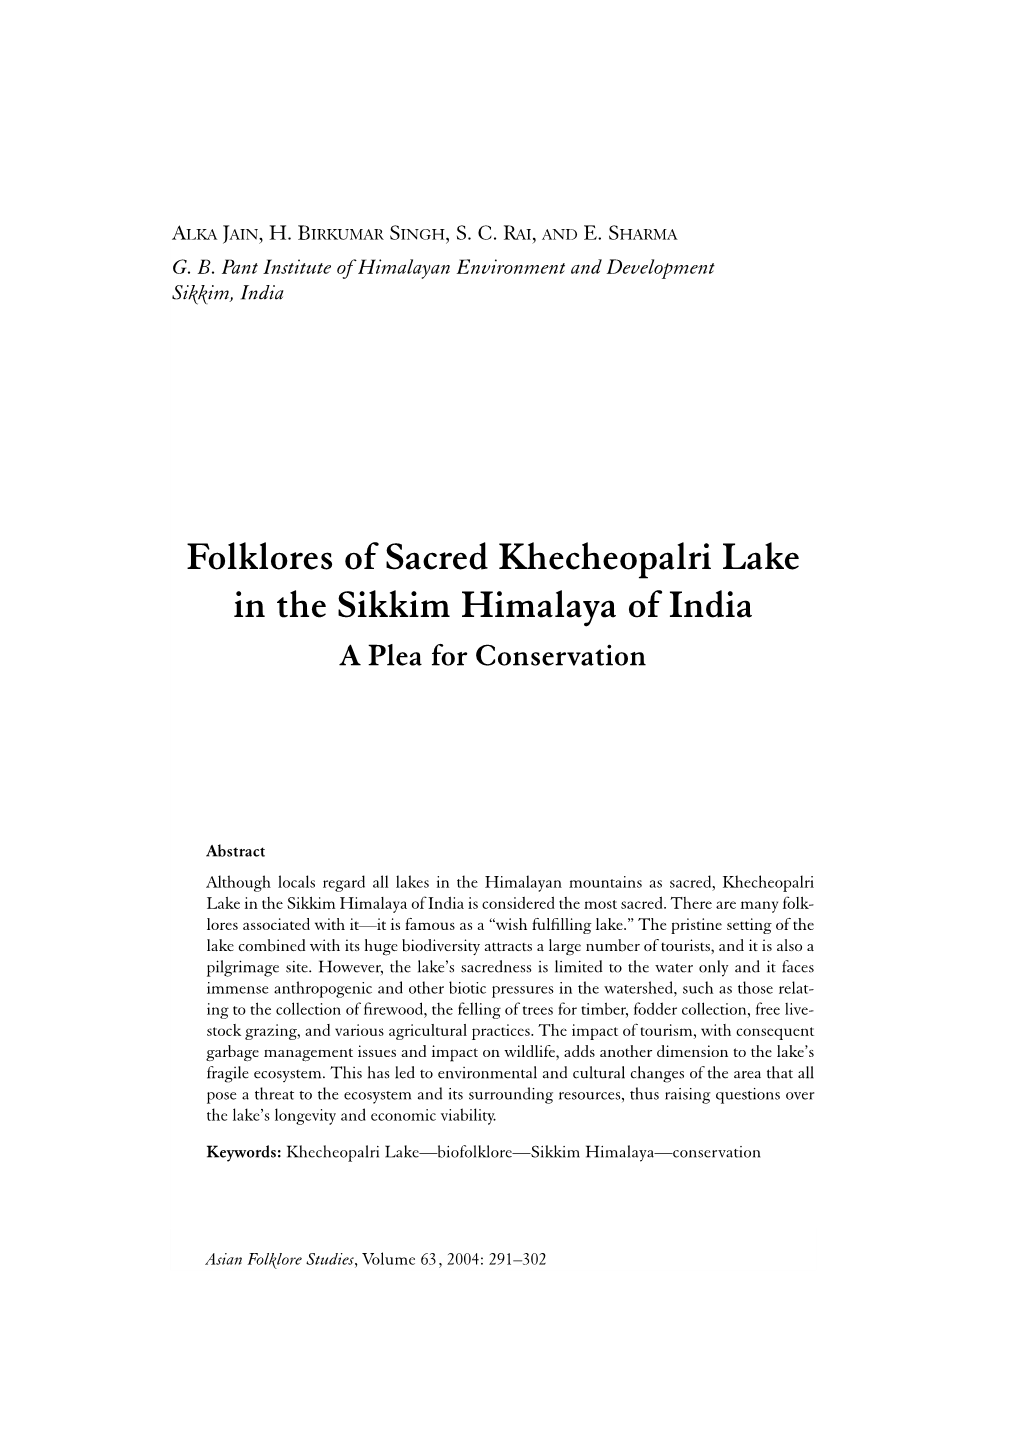 Folklores of Sacred Khecheopalri Lake in the Sikkim Himalaya of India a Plea for Conservation